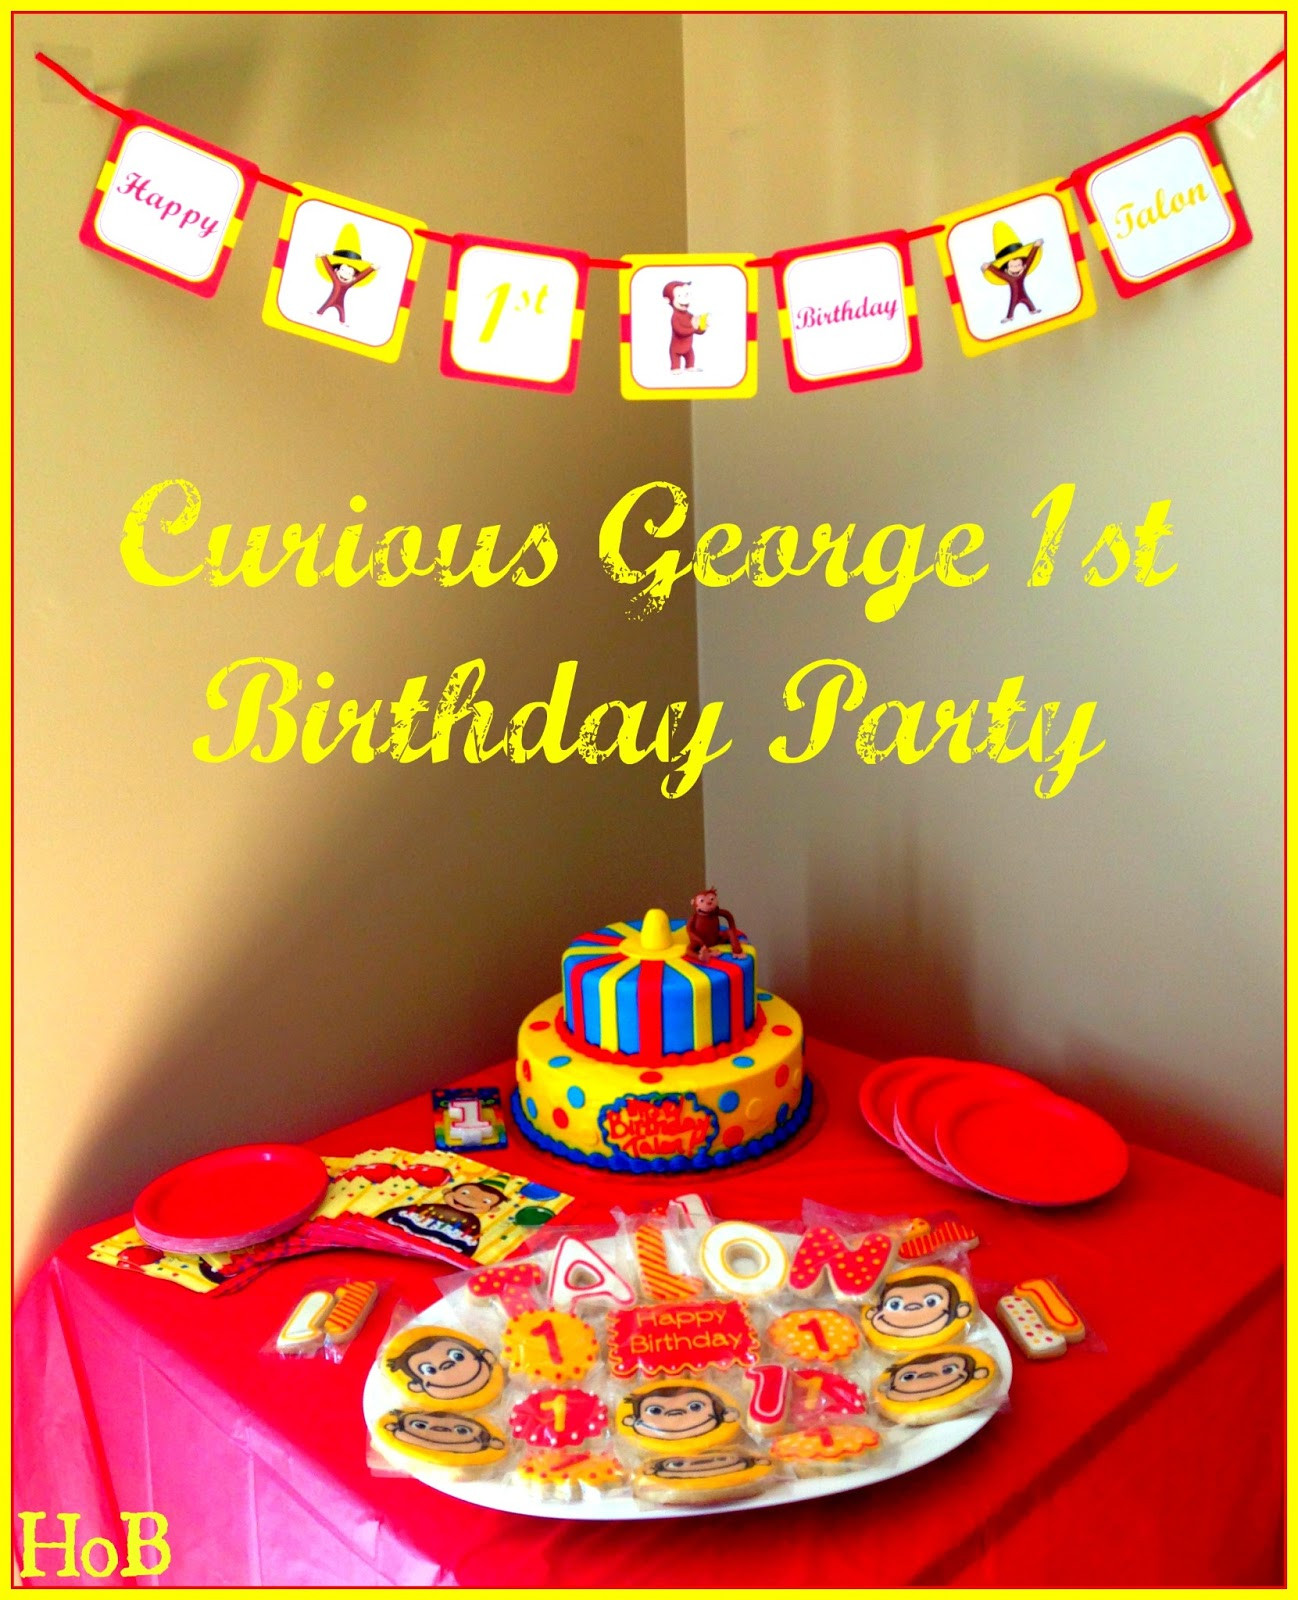 Curious George Birthday Decorations
 House of Burke Talon s Curious George Themed 1st Birthday